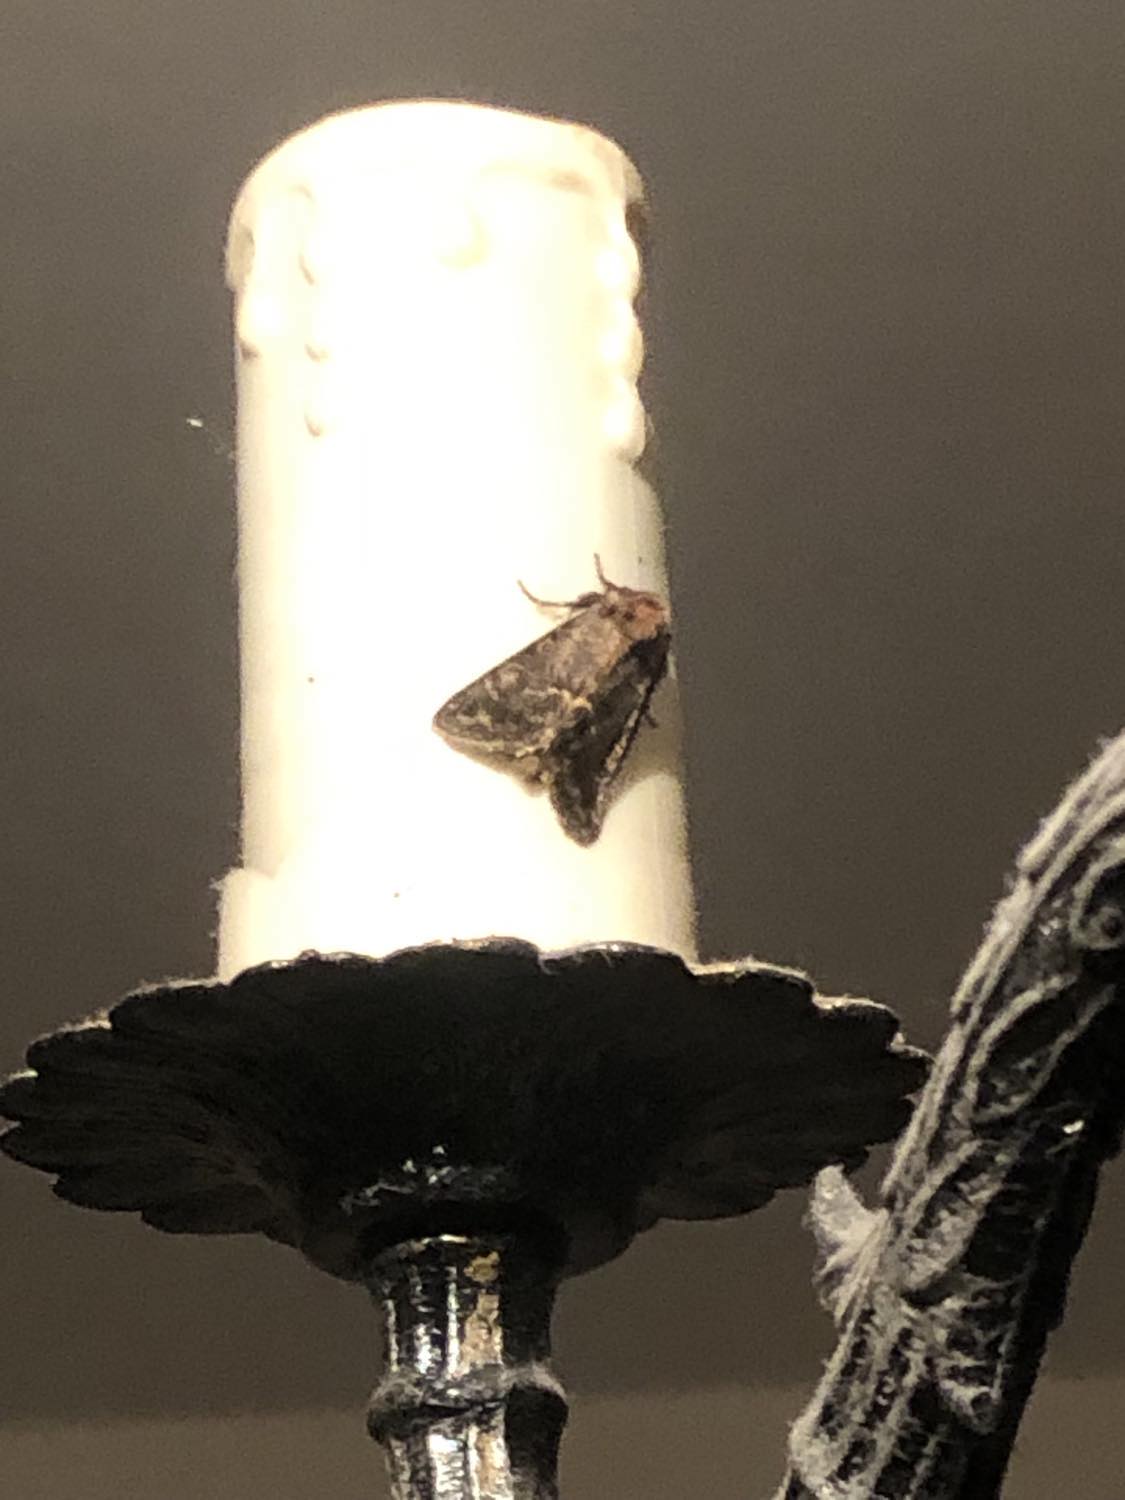 A big ol' moth that's like an inch long, having dark wings with light brown and orangish marks, and big ol arms clinging to the chandelier candlestick bulb holder.